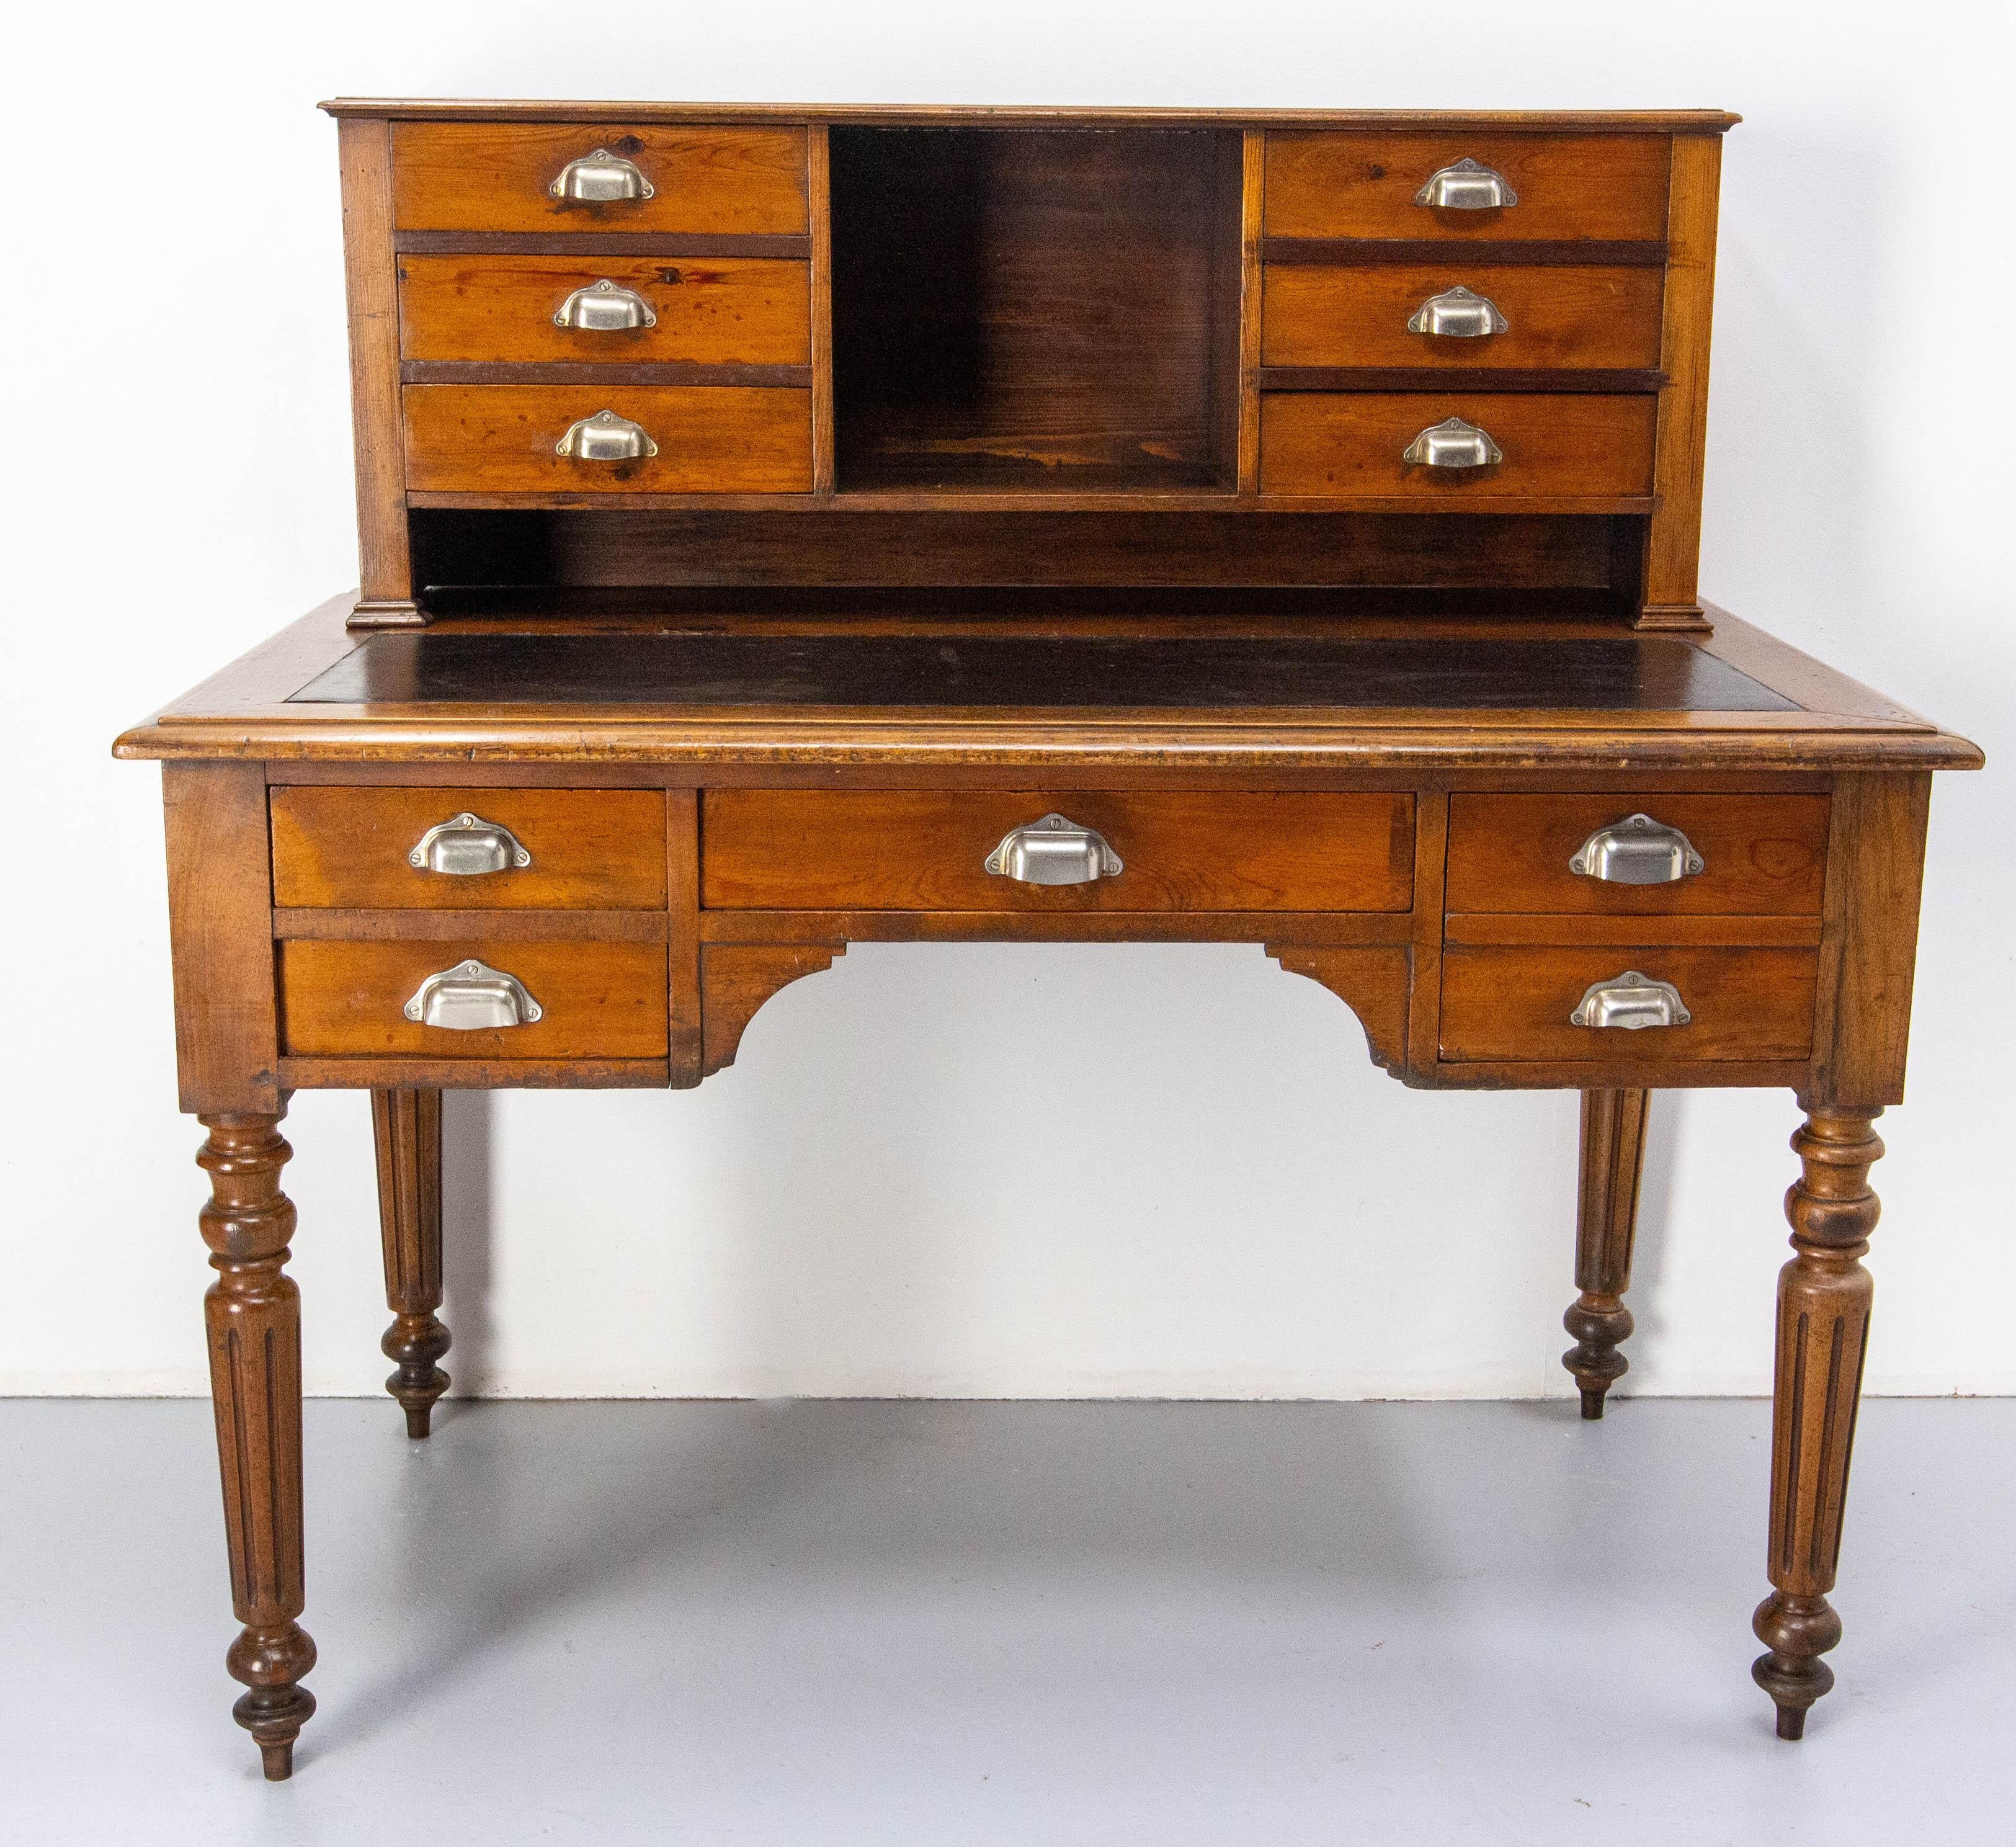 French 19th century Louis Philippe pine desk, the top is recovered of coated fabric.
Ten drawers of different size.

Table height: 31.50 in. (80 cm)
Height between the floor and the belt of the desk: 21.26 in. (54 cm)
Good condition.

Shipping: 
75